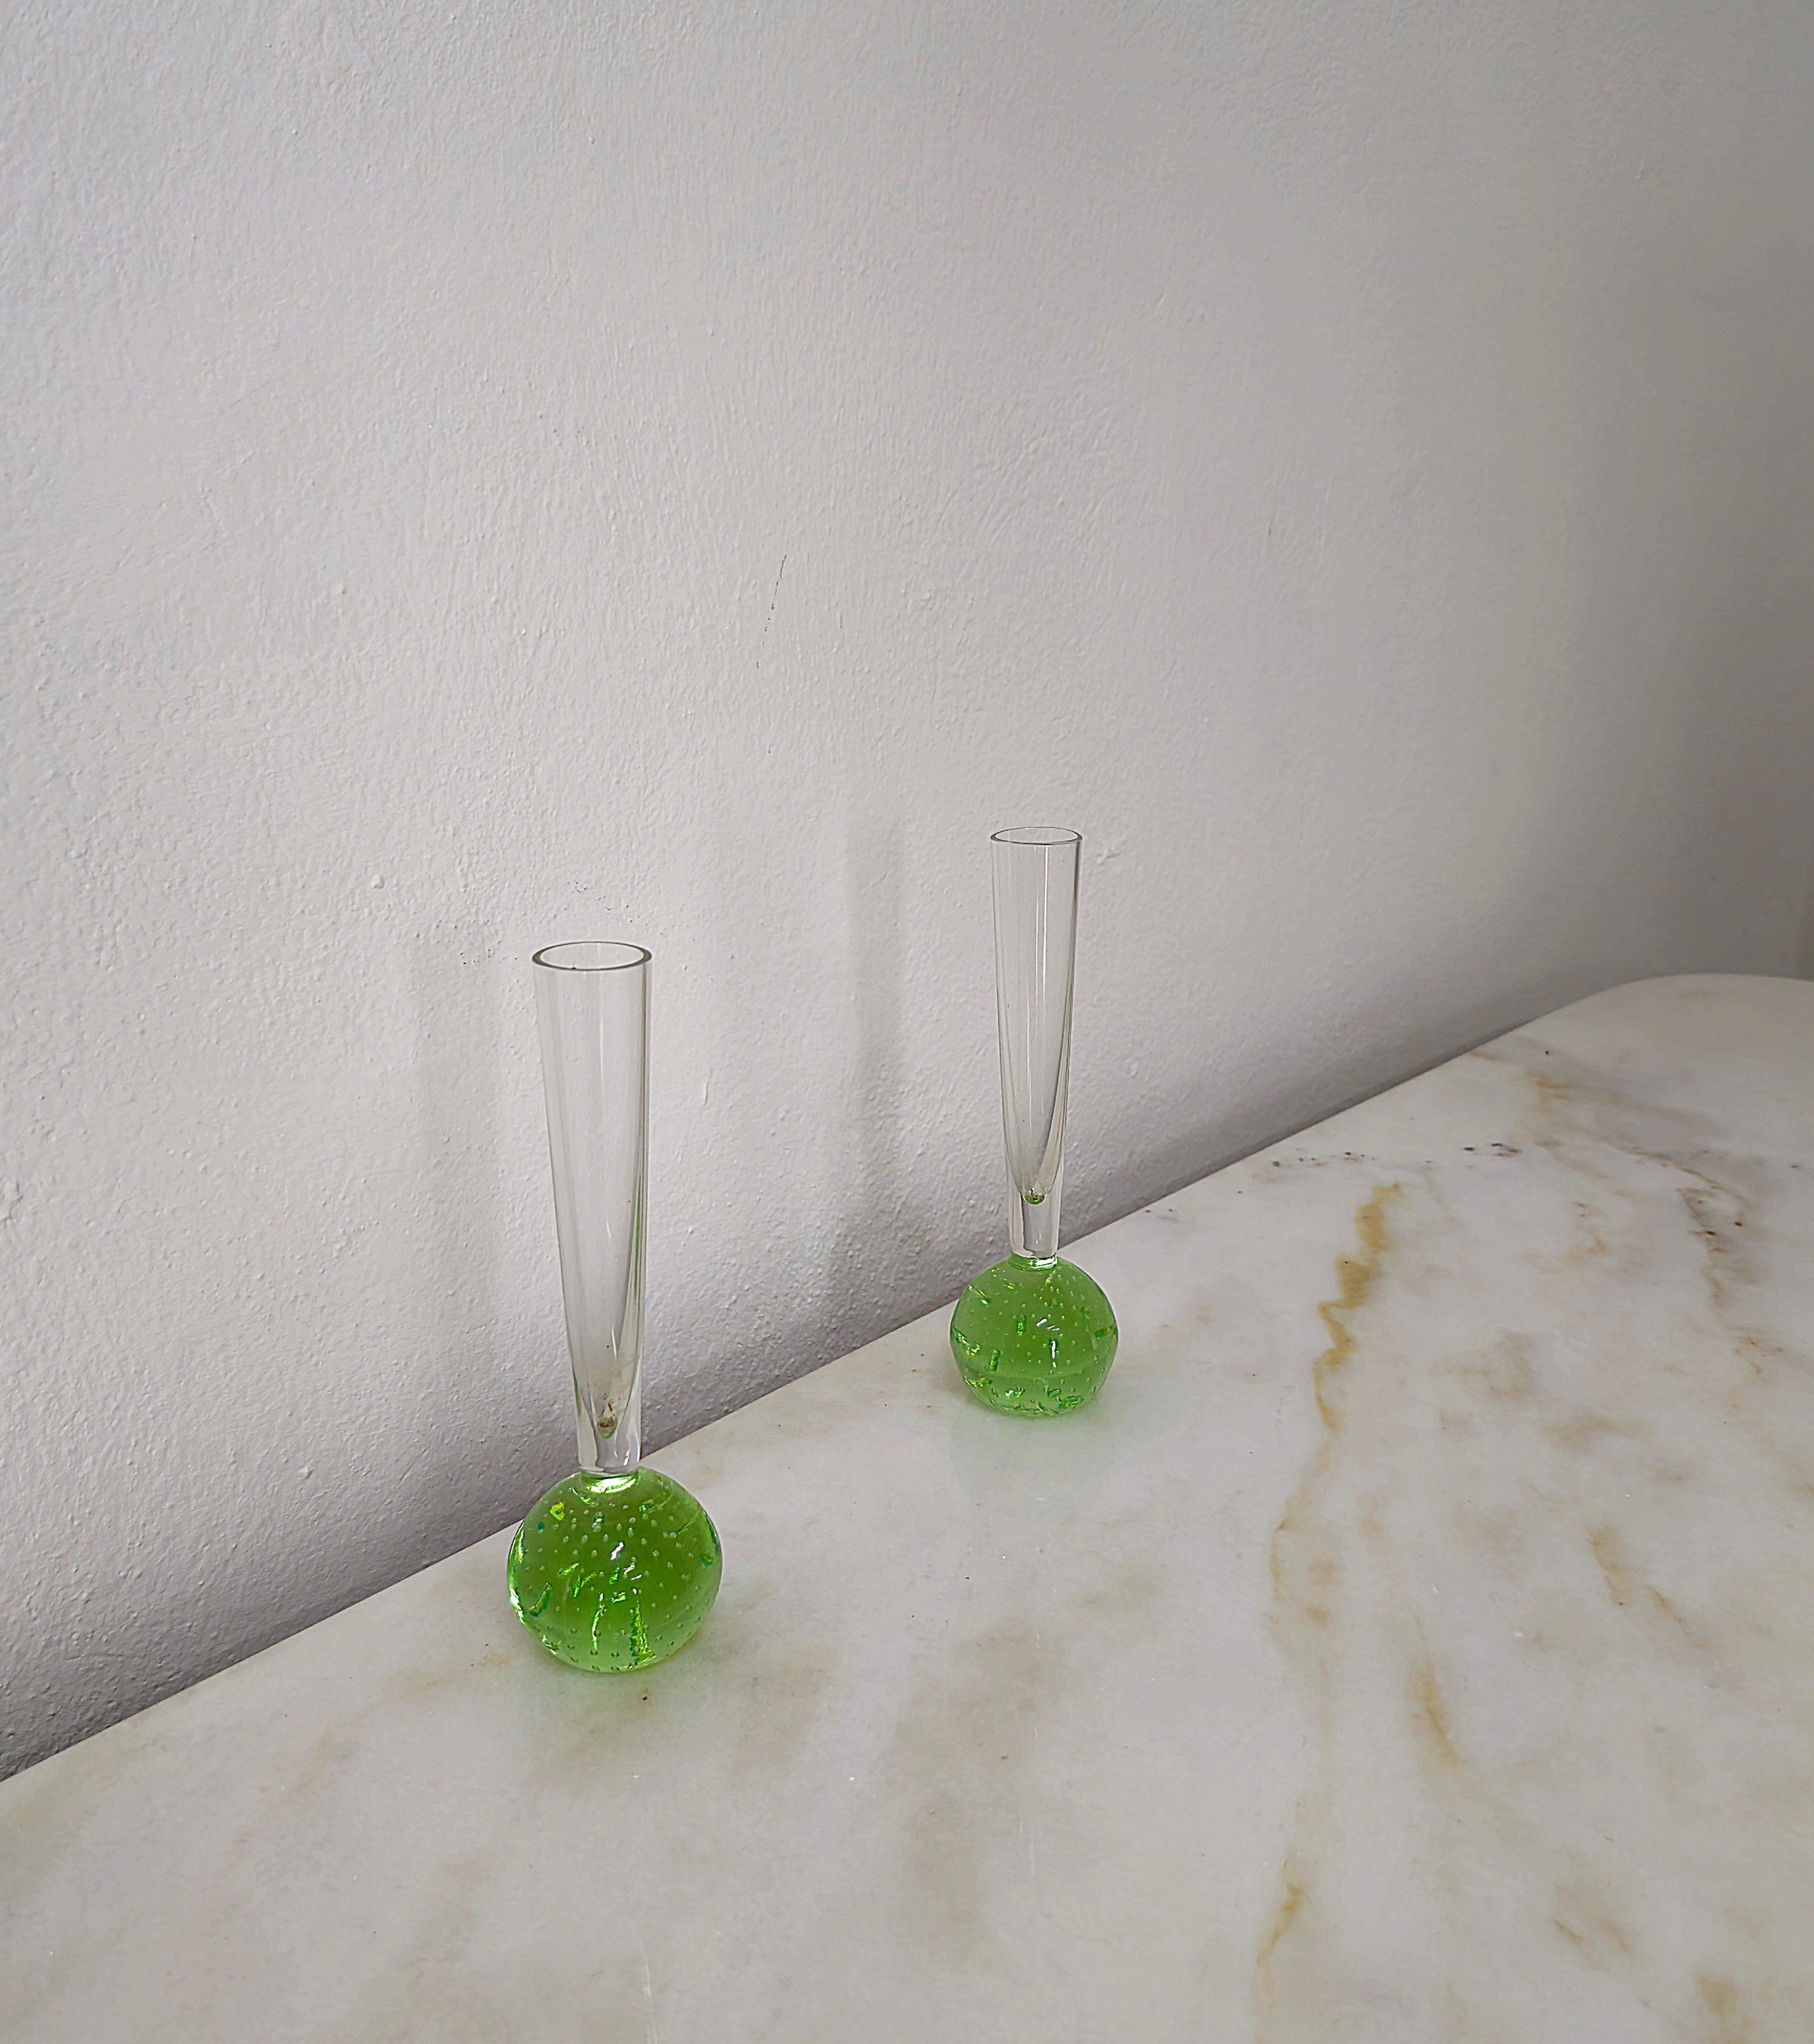 Set of 2 small long-necked vases produced in Italy in the 1970s. Each single vase was made in submerged Murano glass with the bullicante technique, which creates a particular combination of vibrant colors in shades of green.




Note: We try to